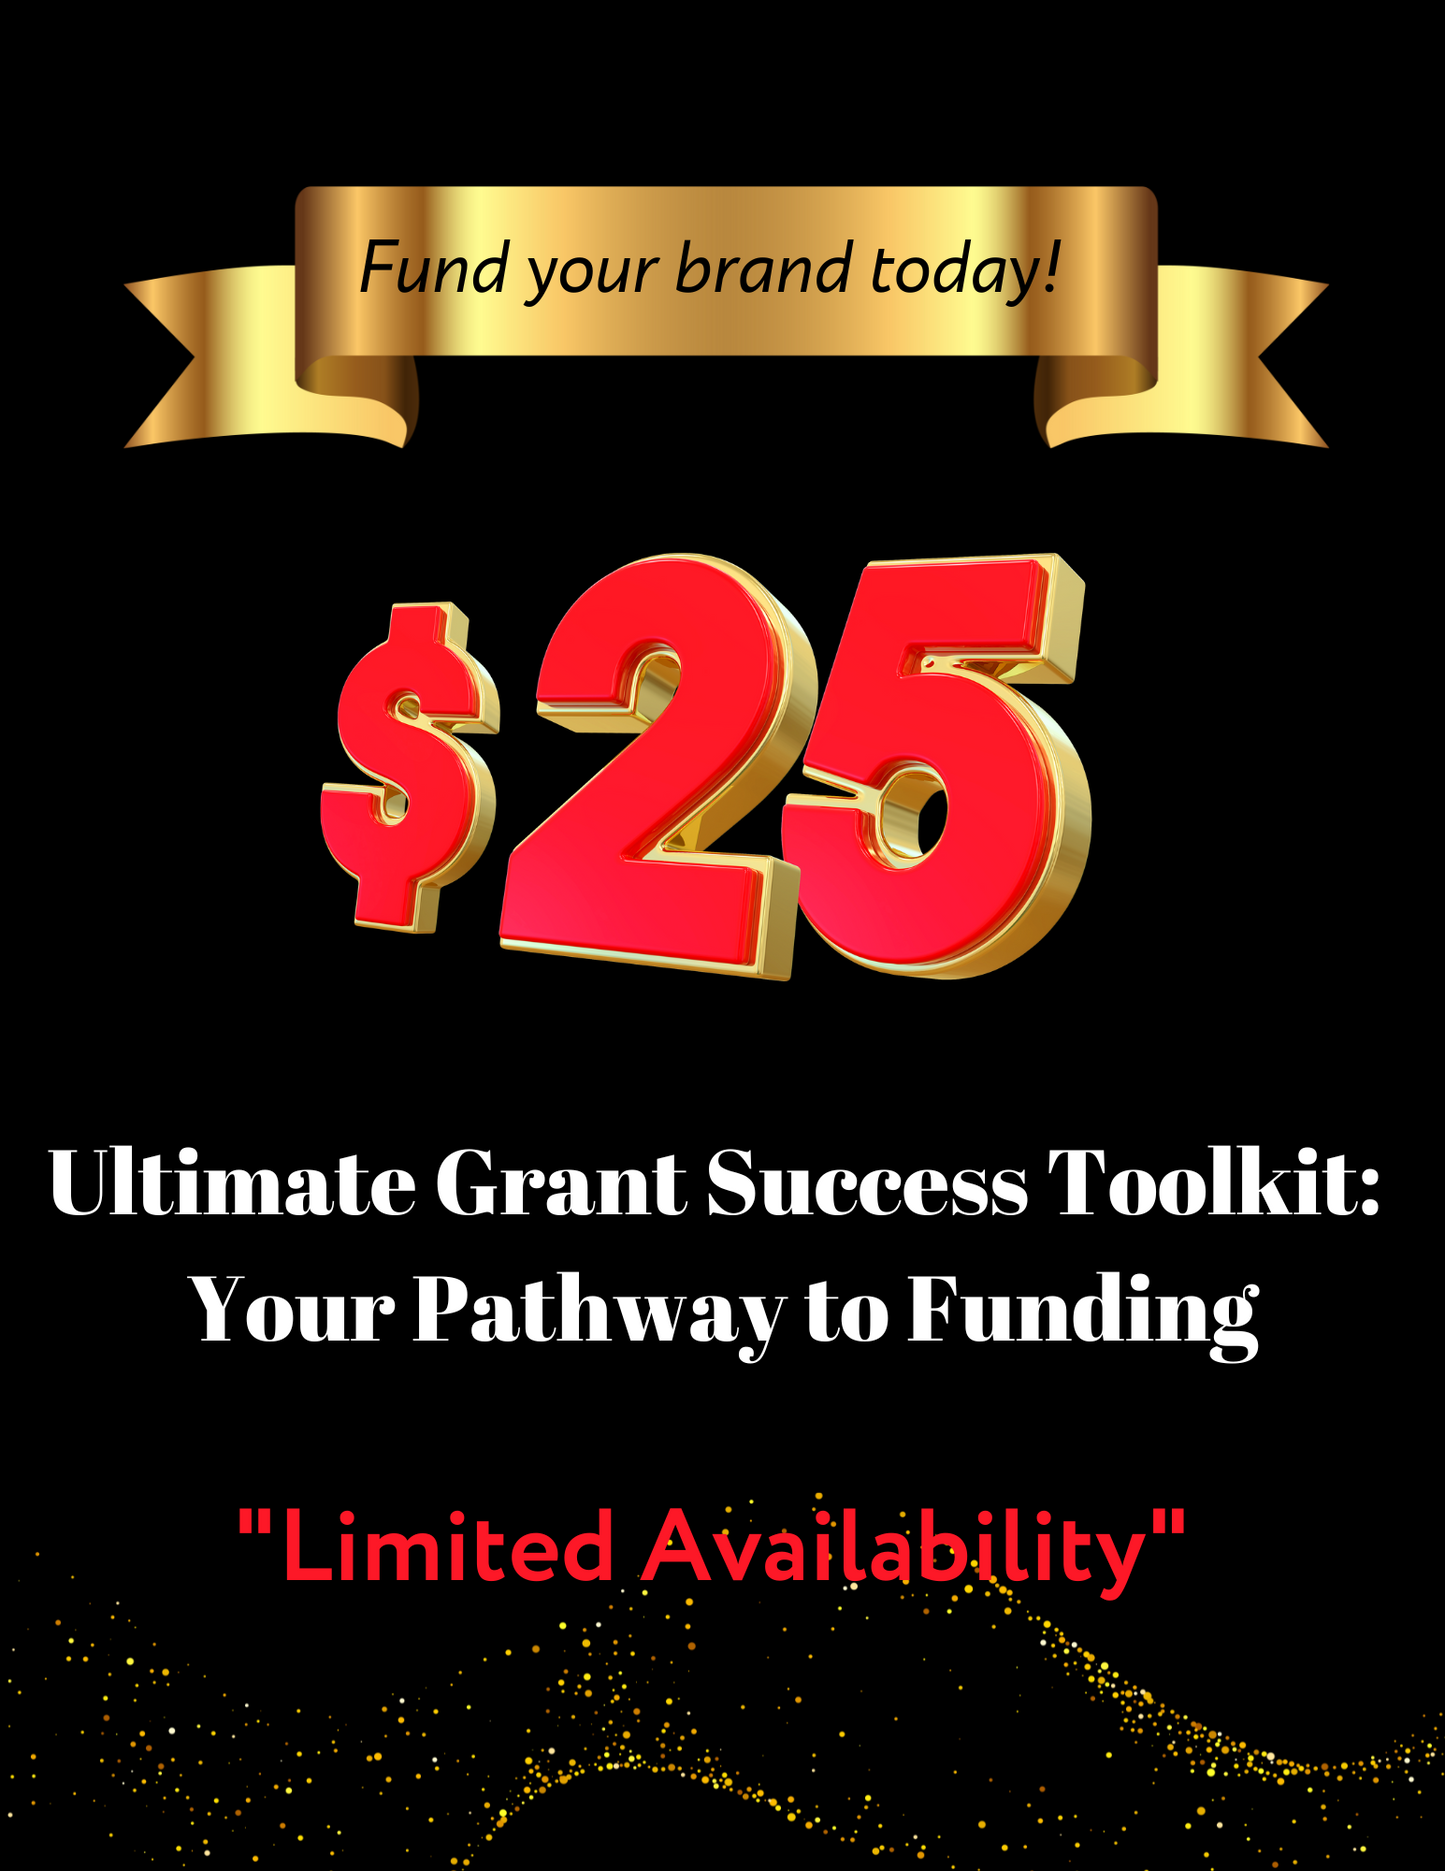 Ultimate Grant Success Toolkit: Your Pathway to Funding